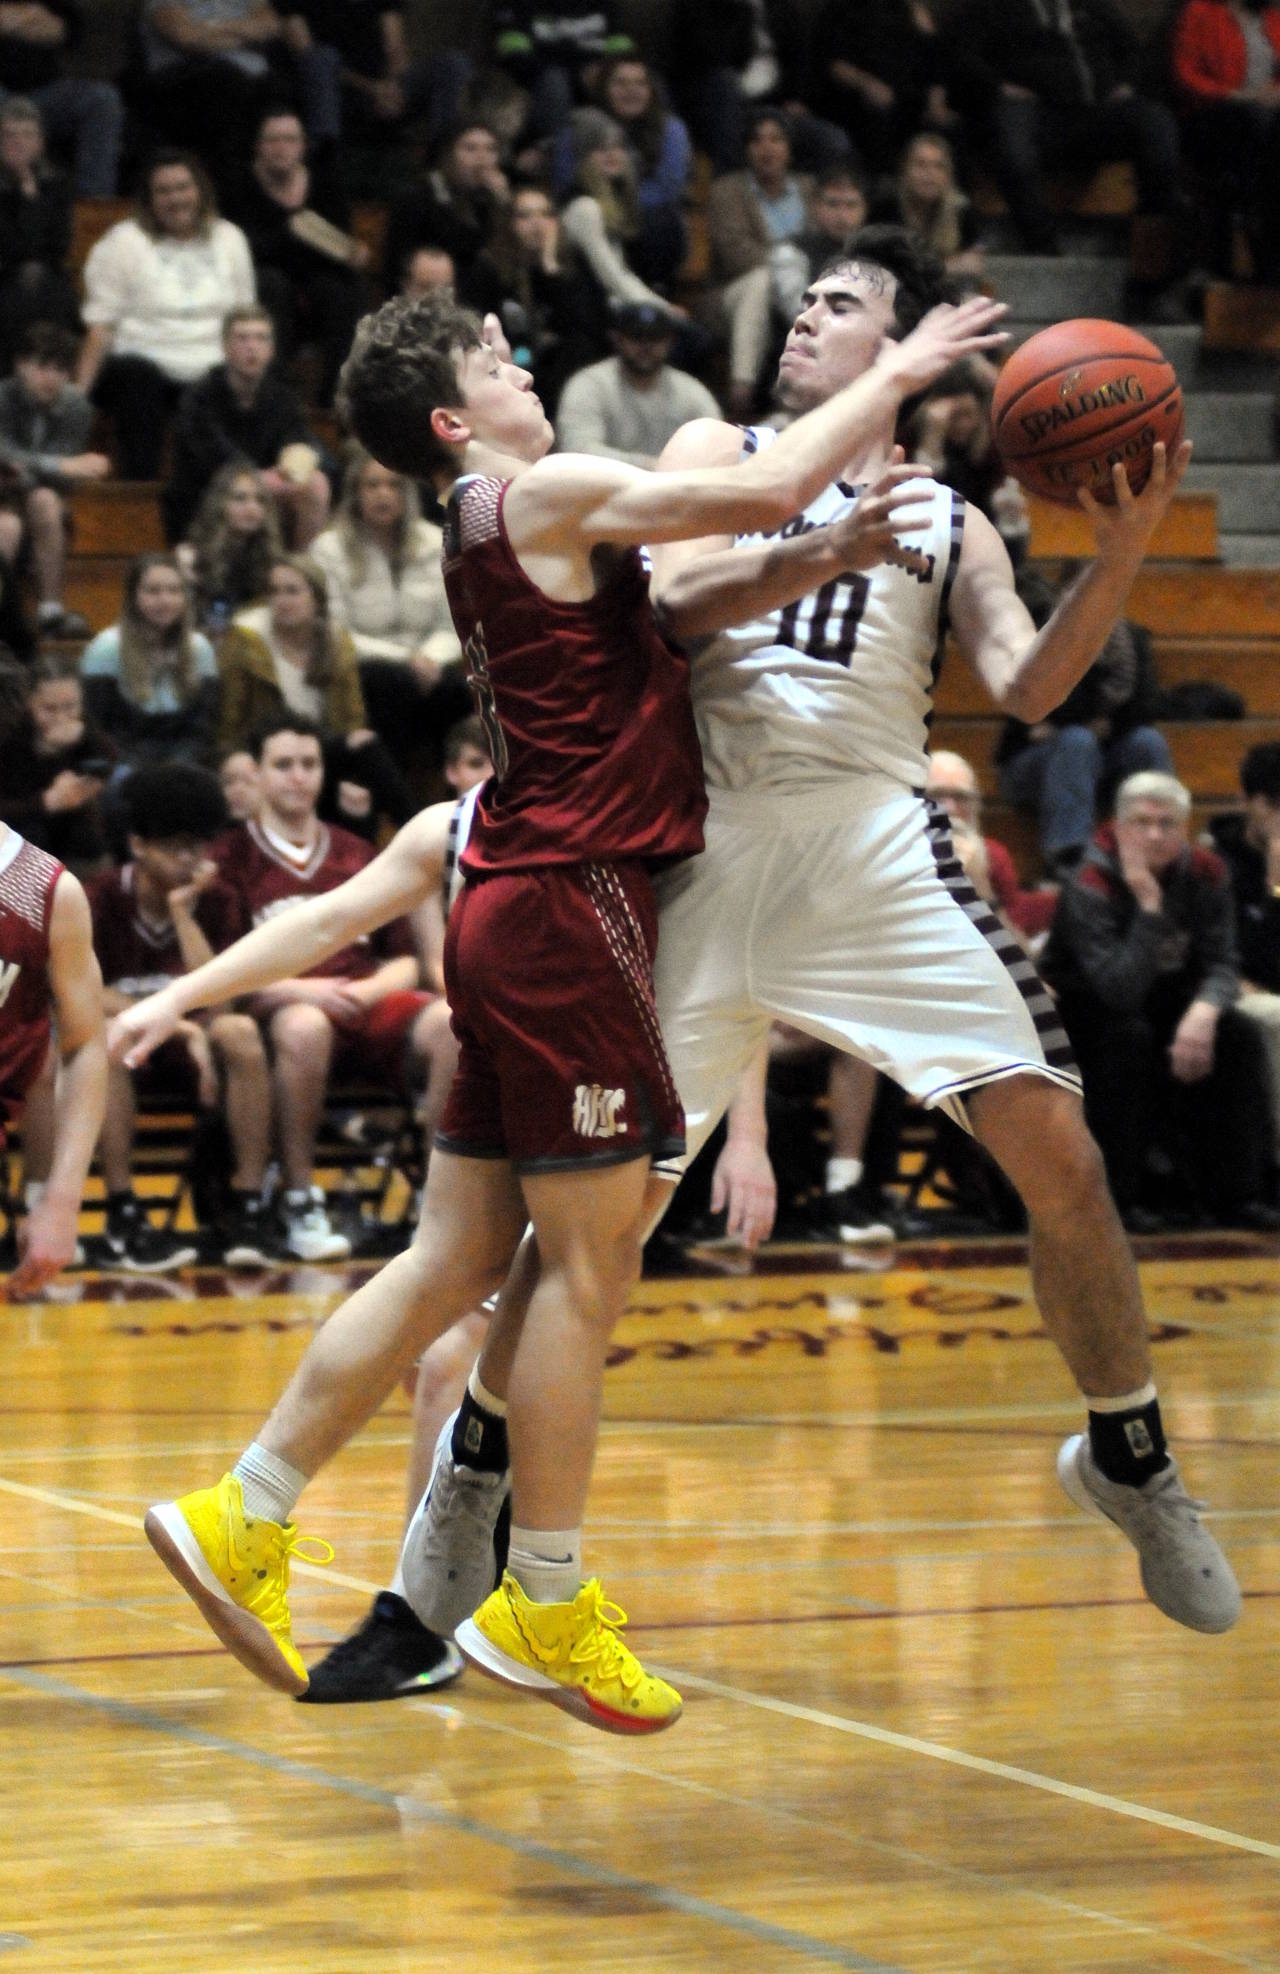 Montesano’s Trace Ridgway (10) attempts a shot while Hoquiam’s Cameron Bumstead looks to make a block during Tuesday’s game in Montesano. (Ryan Sparks | Grays Harbor News Group)